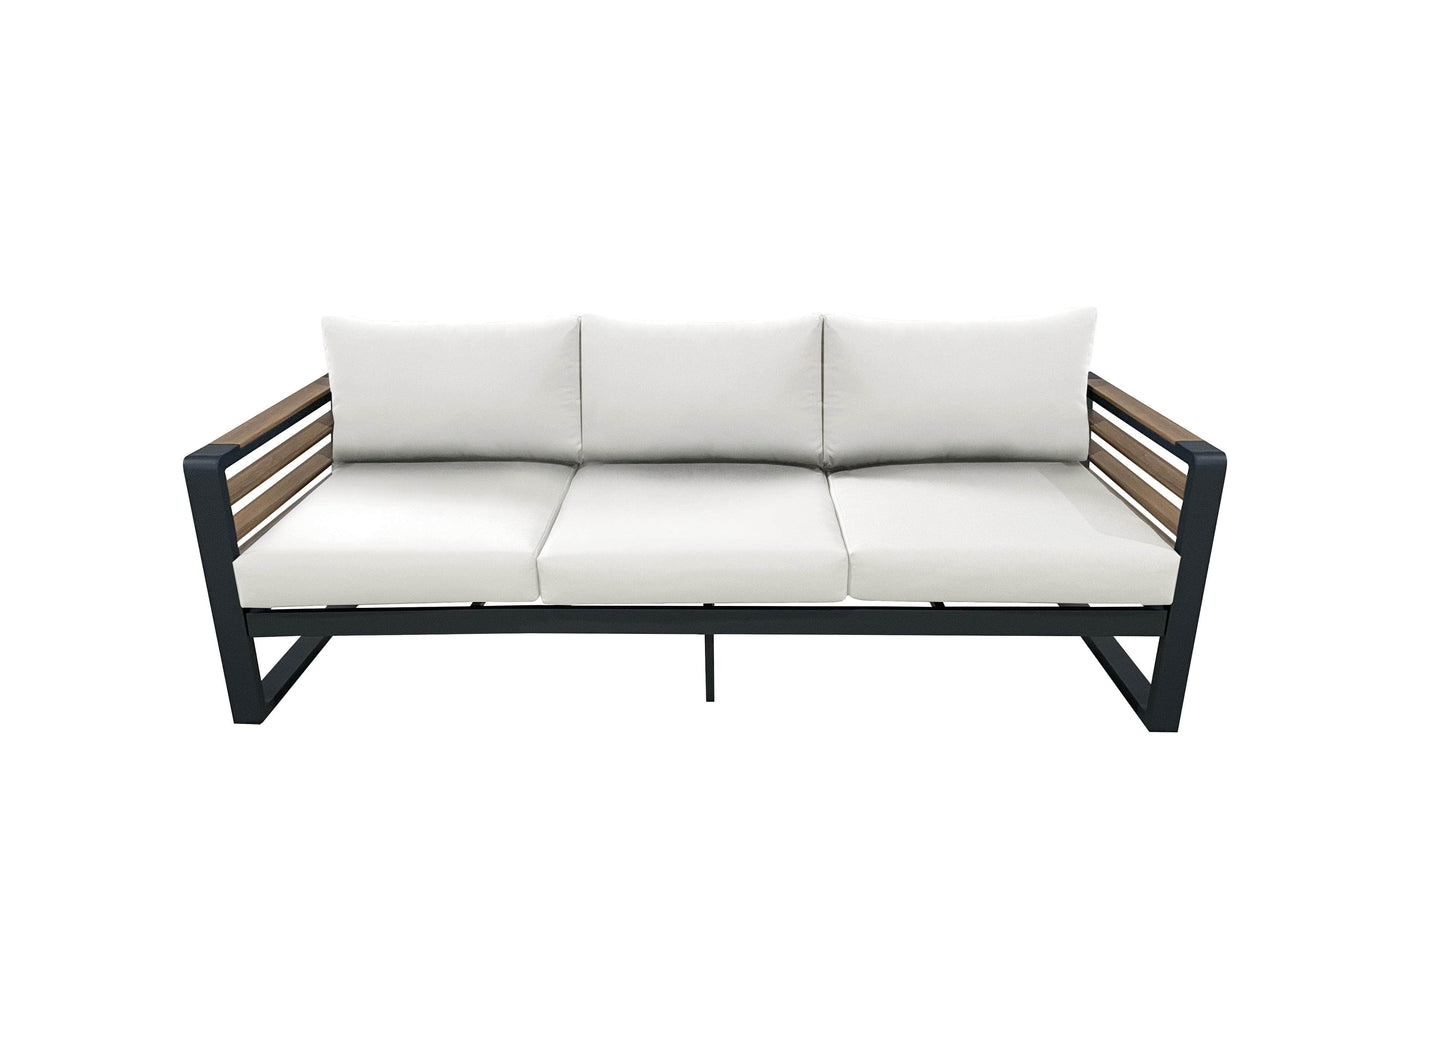 CIEUX Sofa Canvas Natural Avignon Outdoor Patio Aluminum Metal Sofa in Black with Sunbrella Cushions - Available in 2 Colours